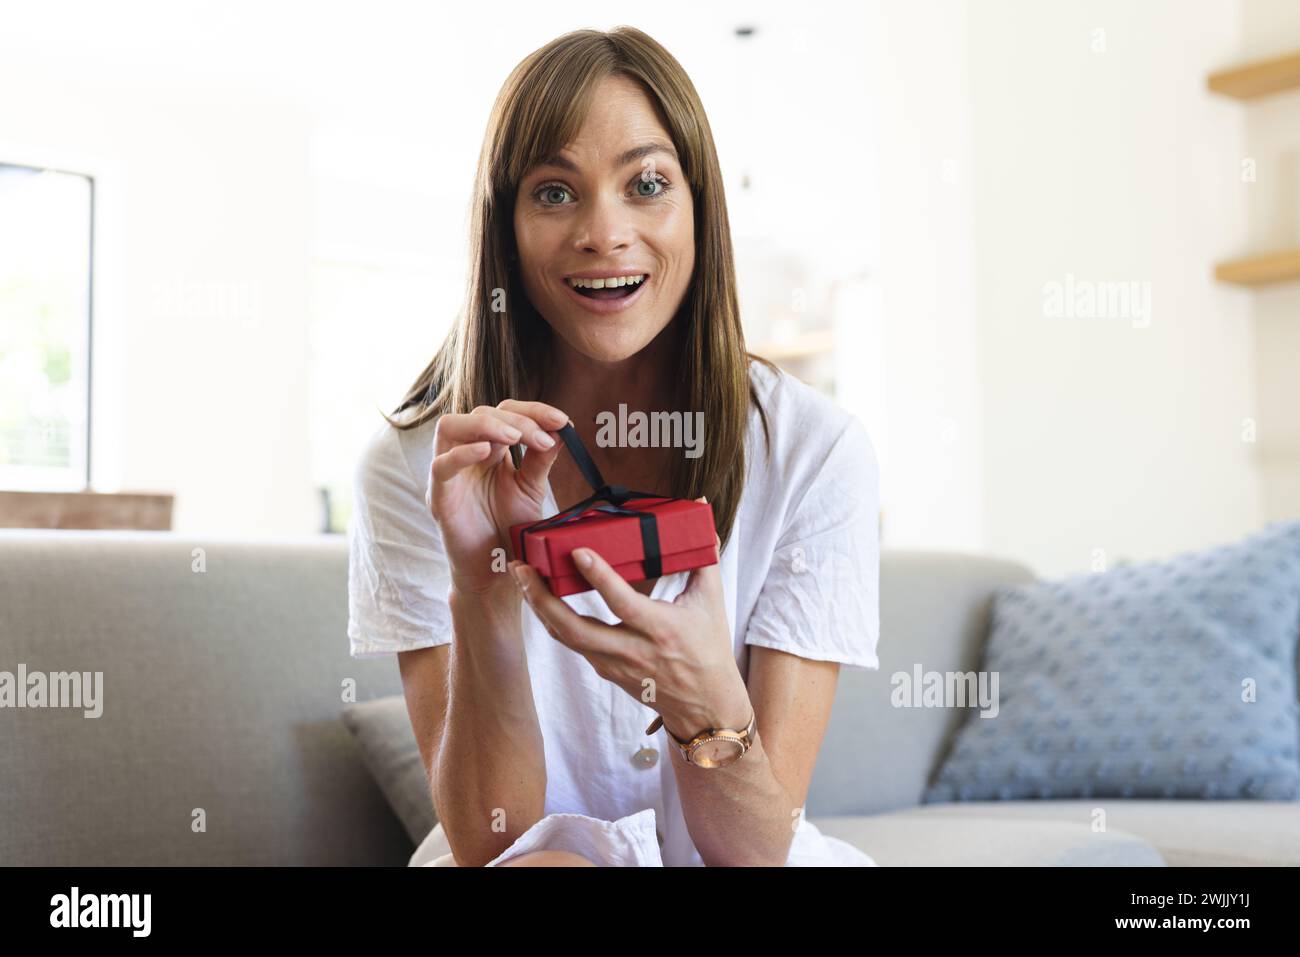 A young Caucasian woman appears delighted as she opens a small red gift box Stock Photo